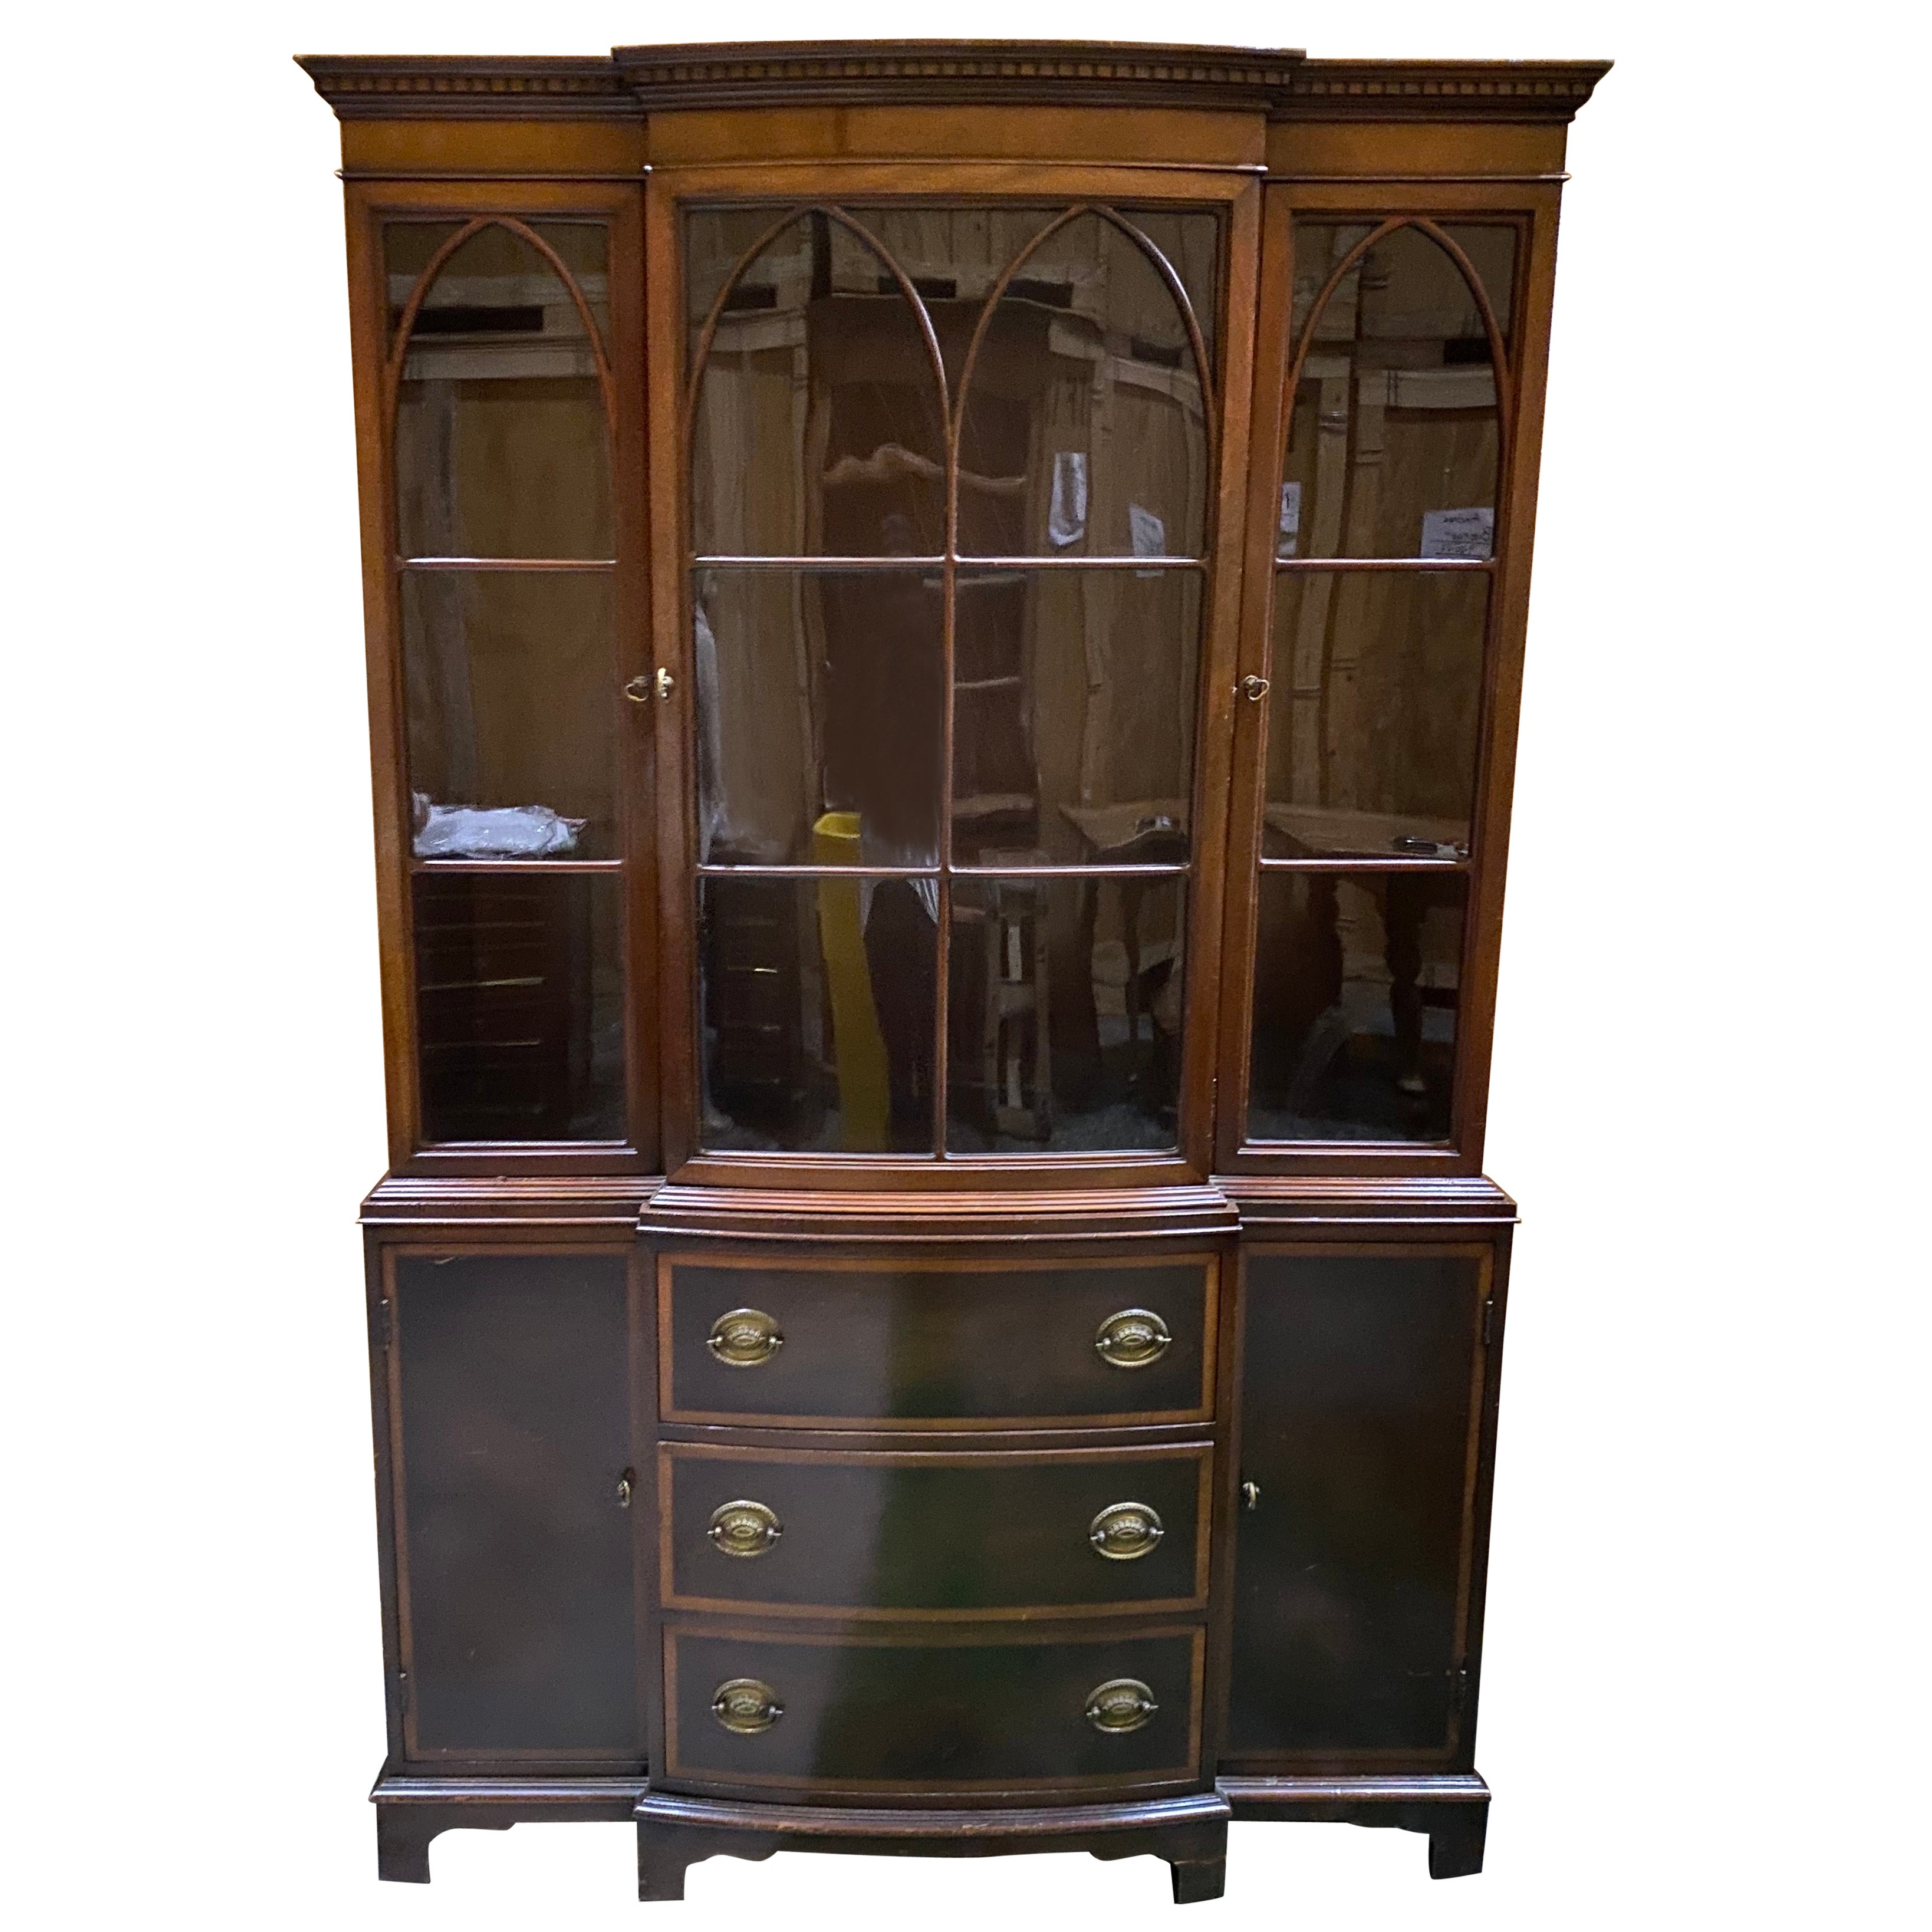 Mahogany Georgian Style Bowfront Bookcase by Fancher Furniture Co